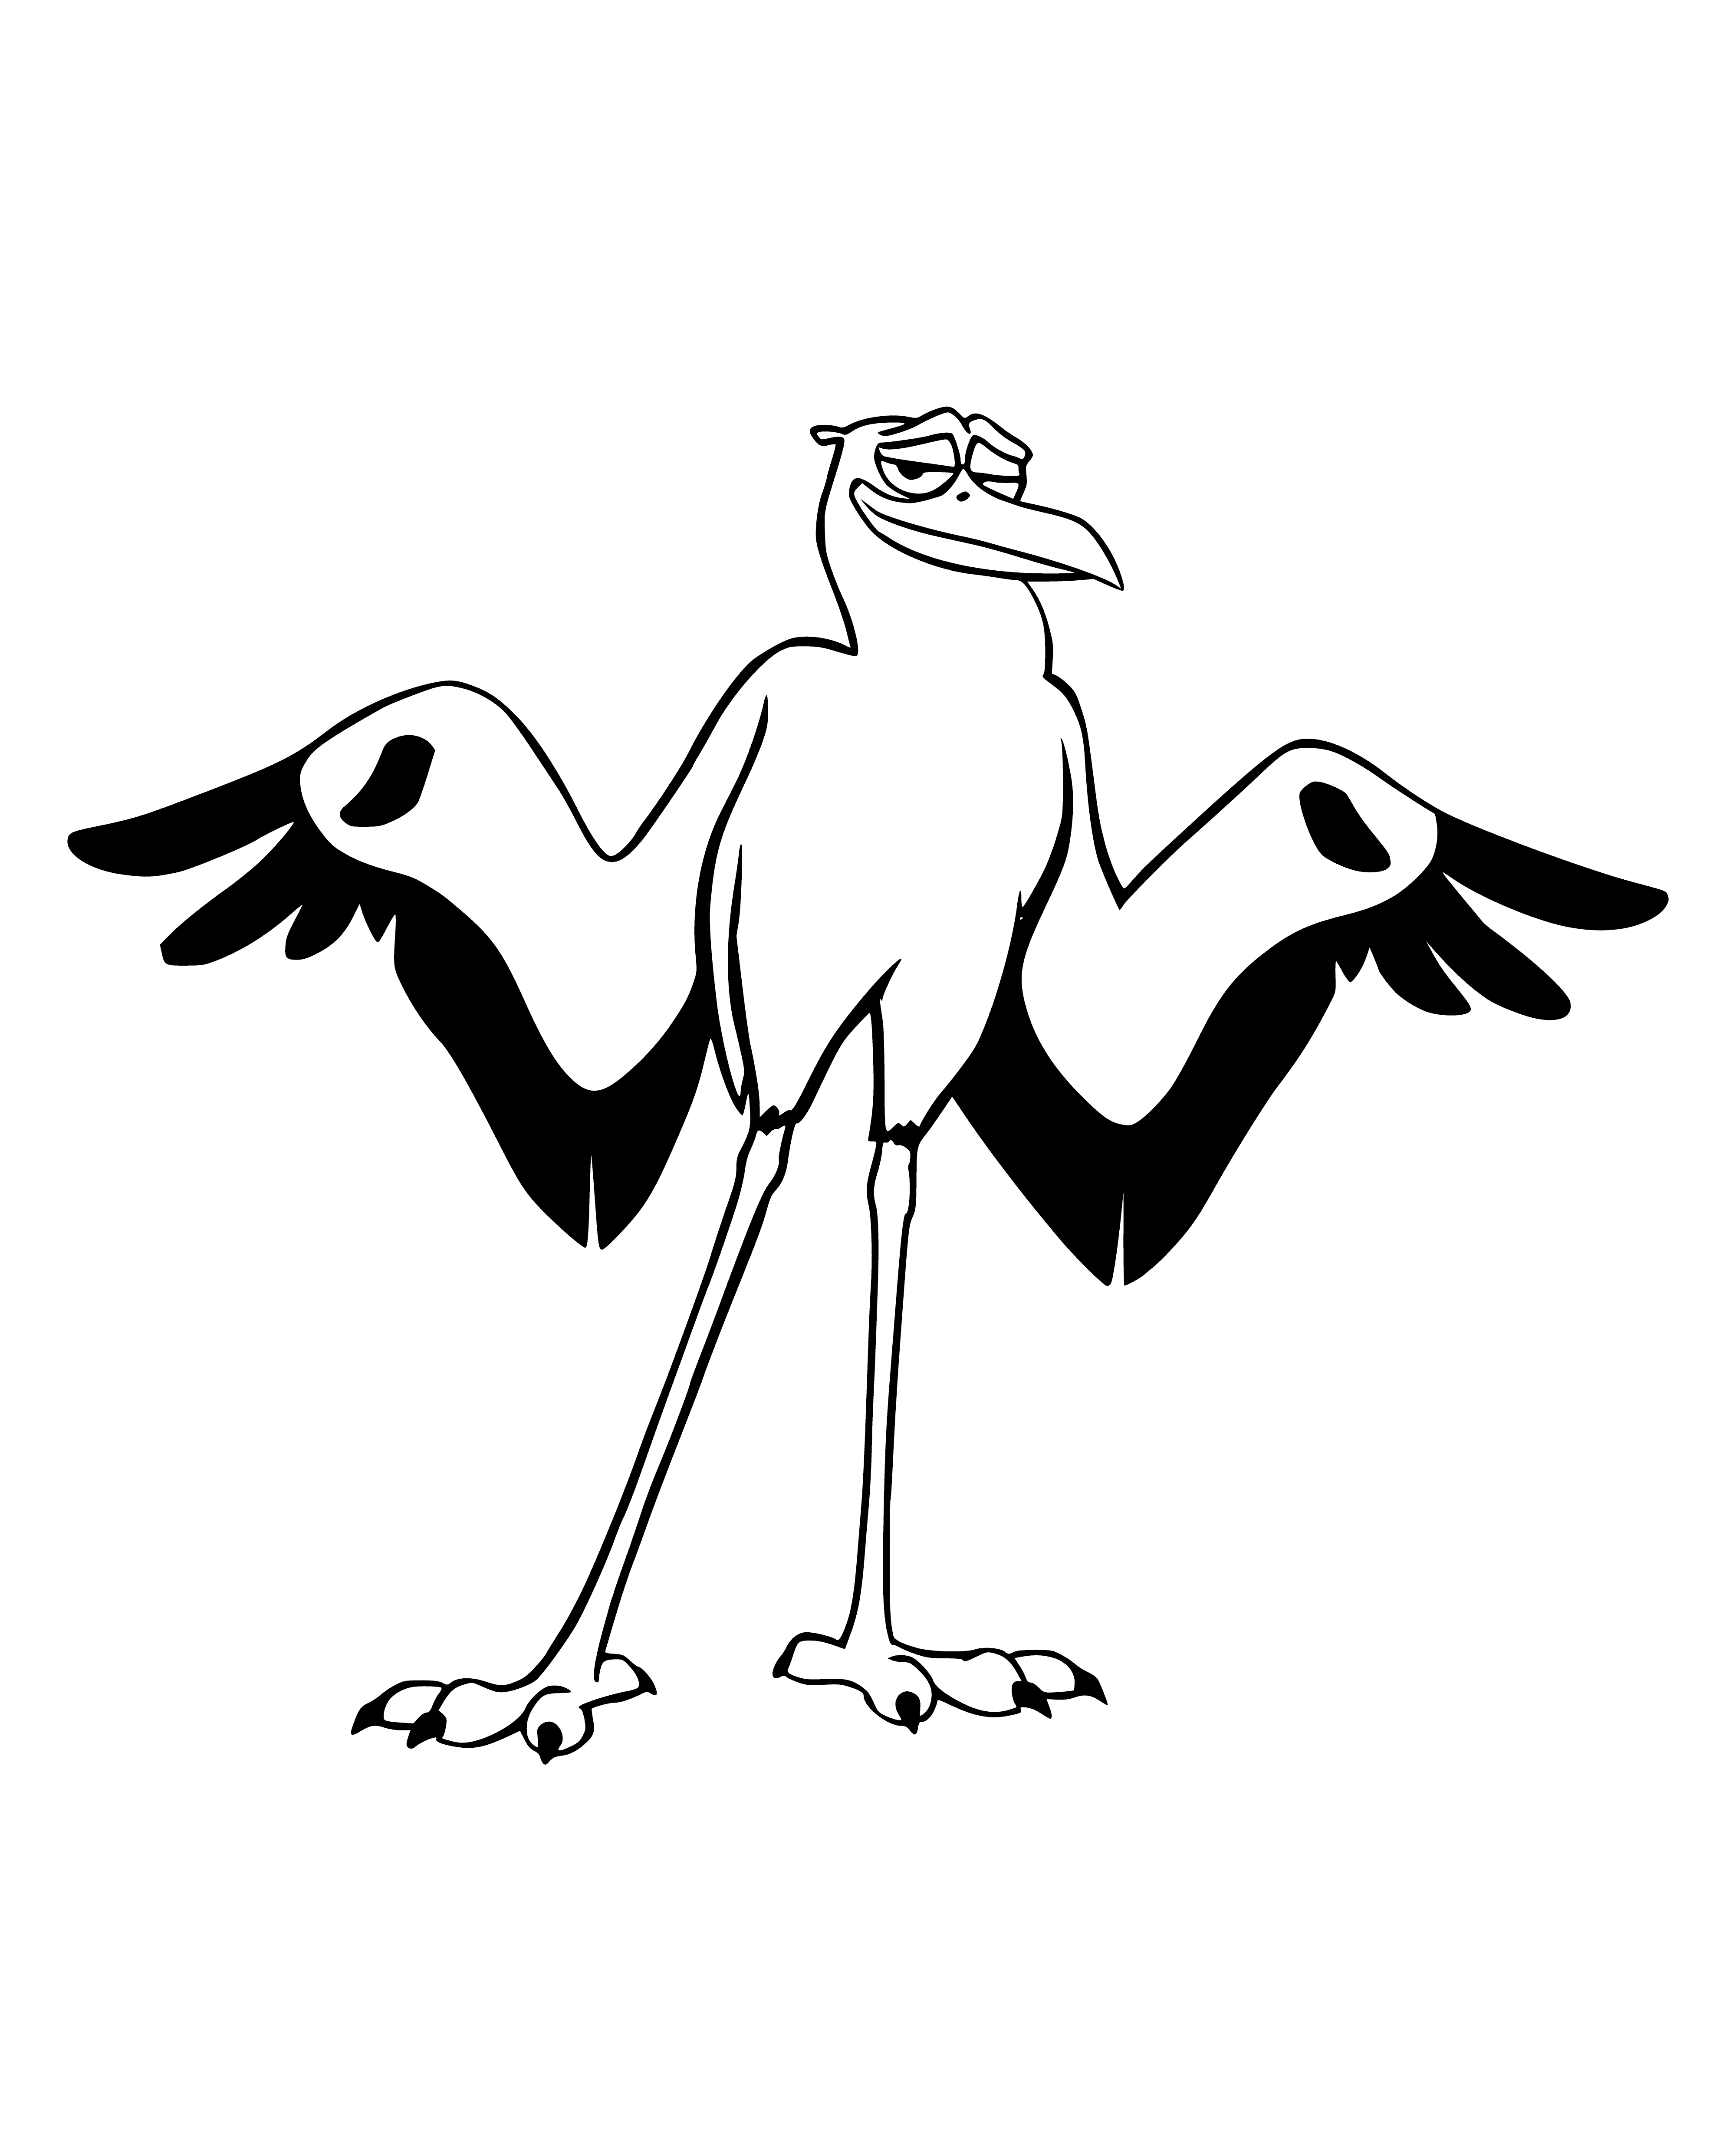 Stork Junior coloring page